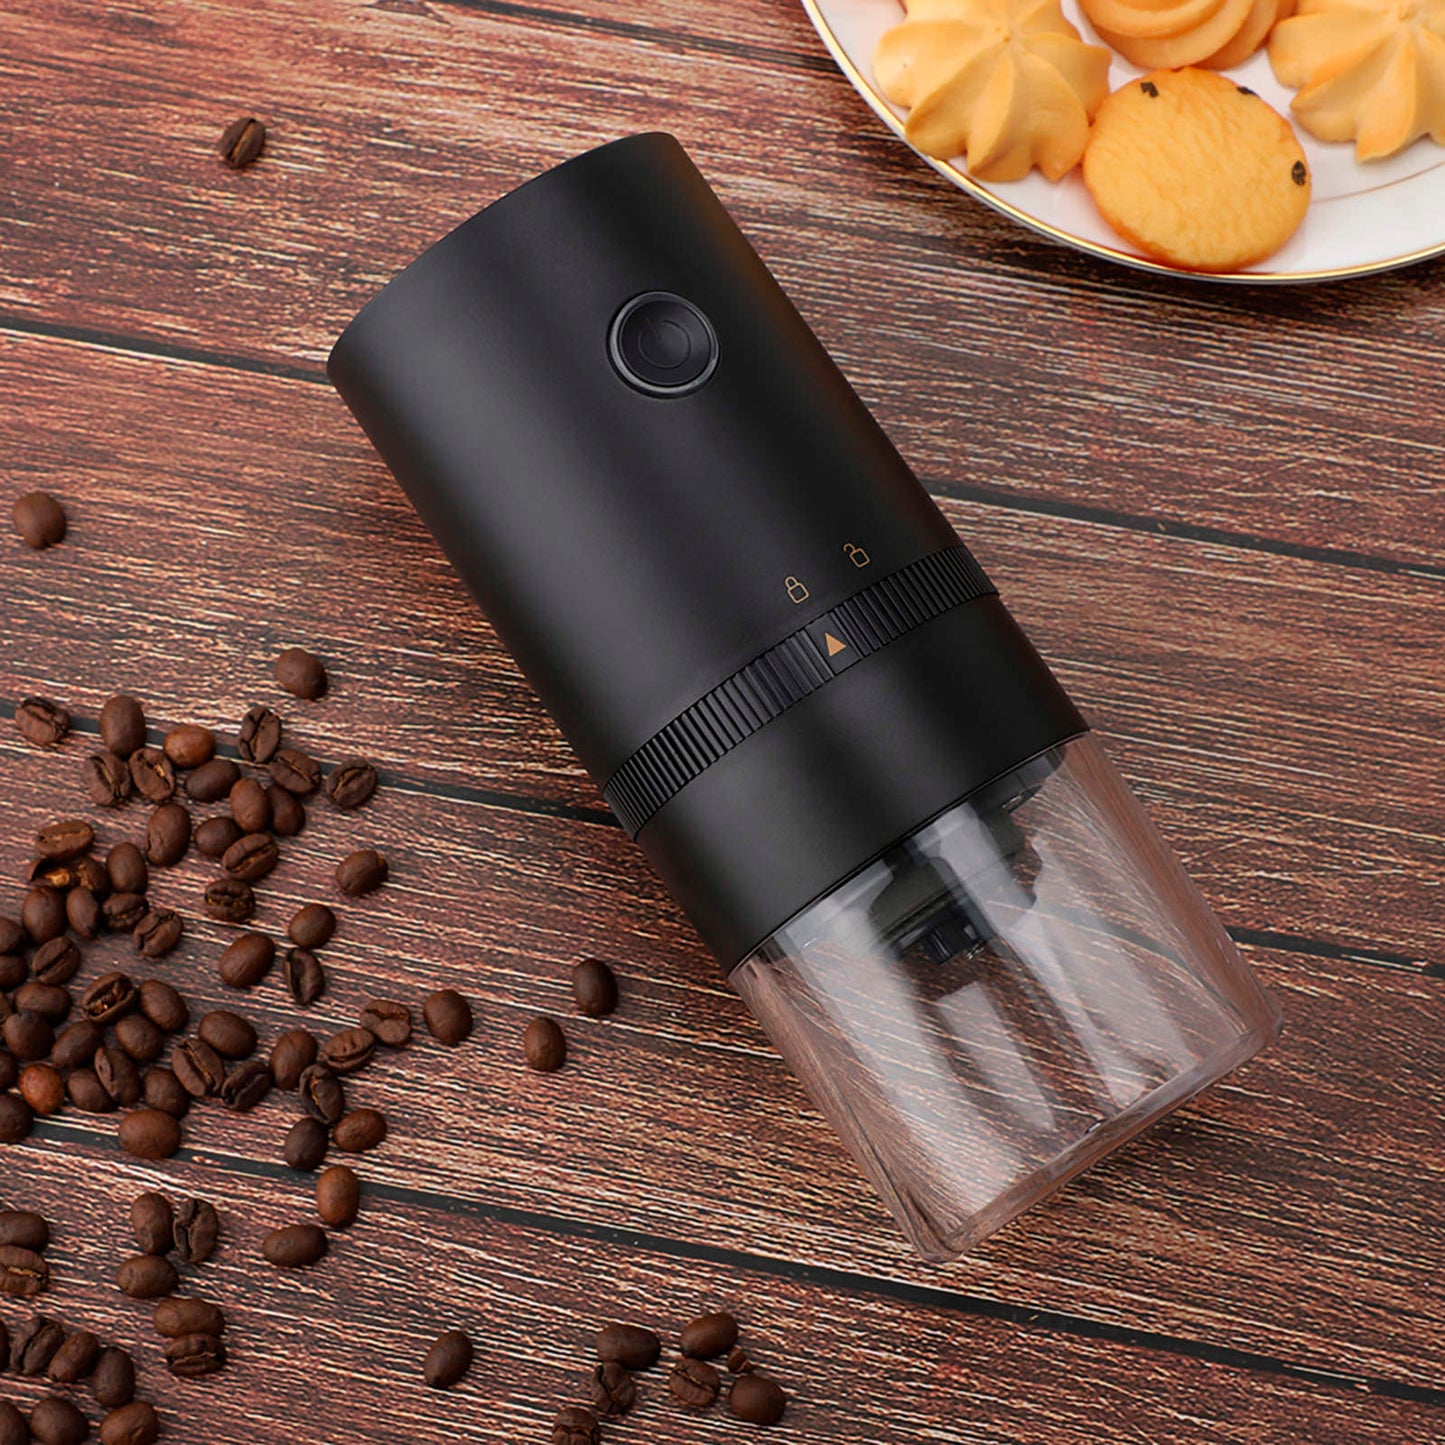 Cordless electric grain grinder with charging via USB cable